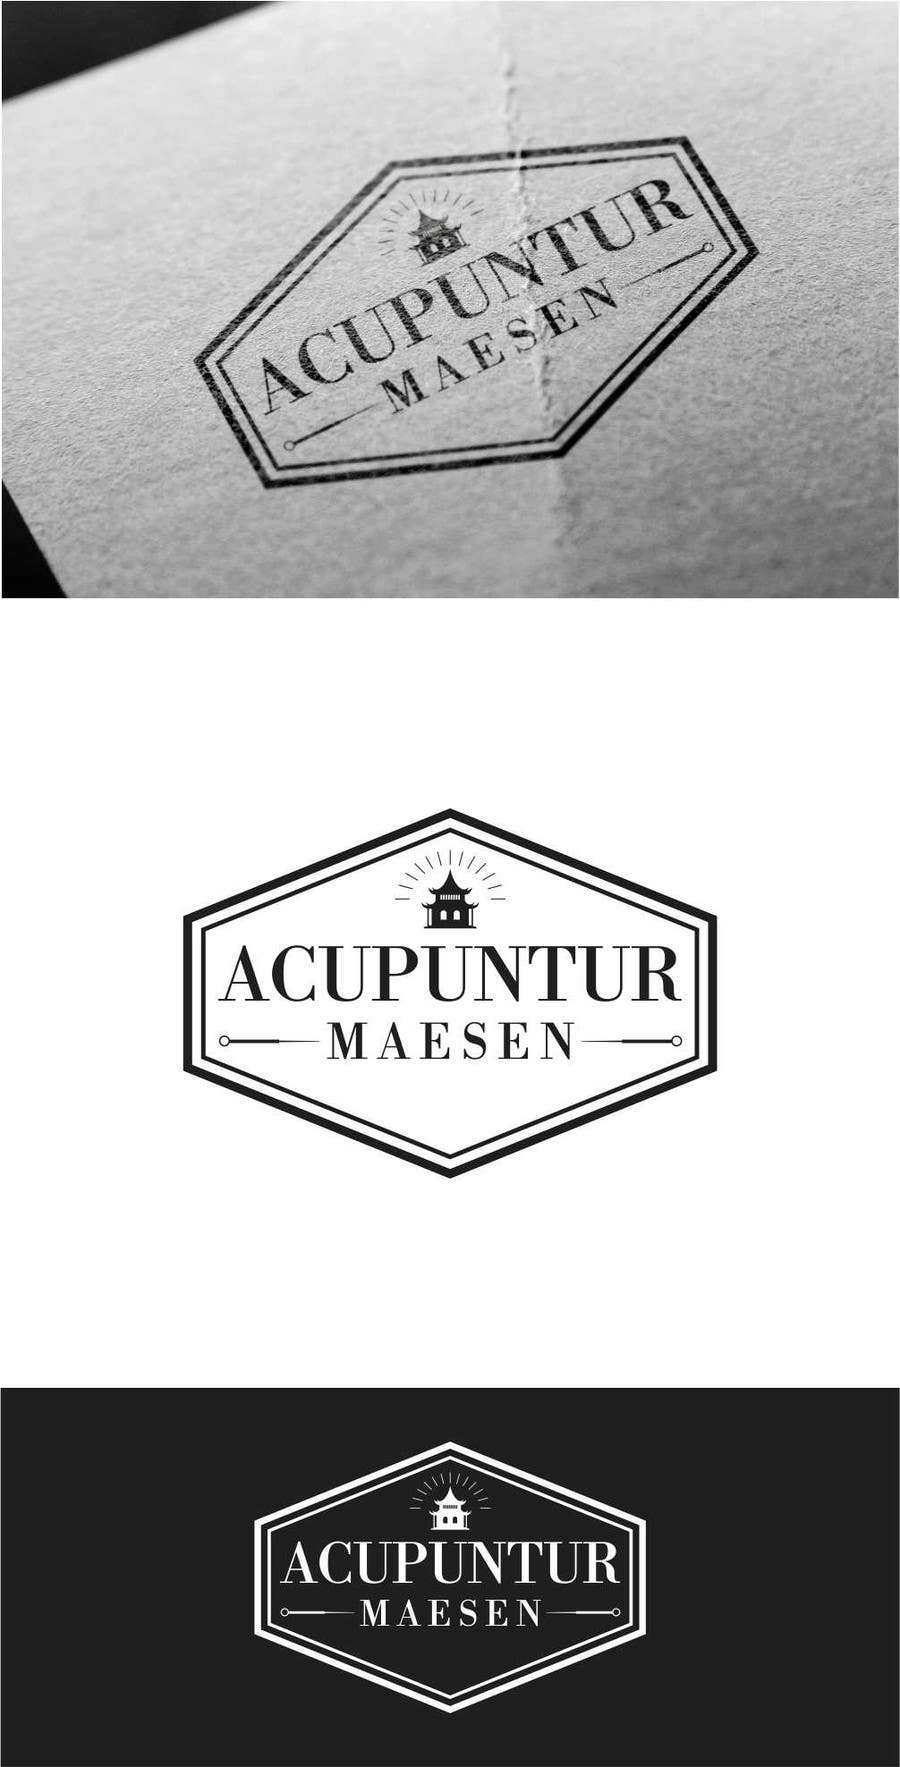 Contest Entry #25 for                                                 Typographic logo for acupunture practice
                                            